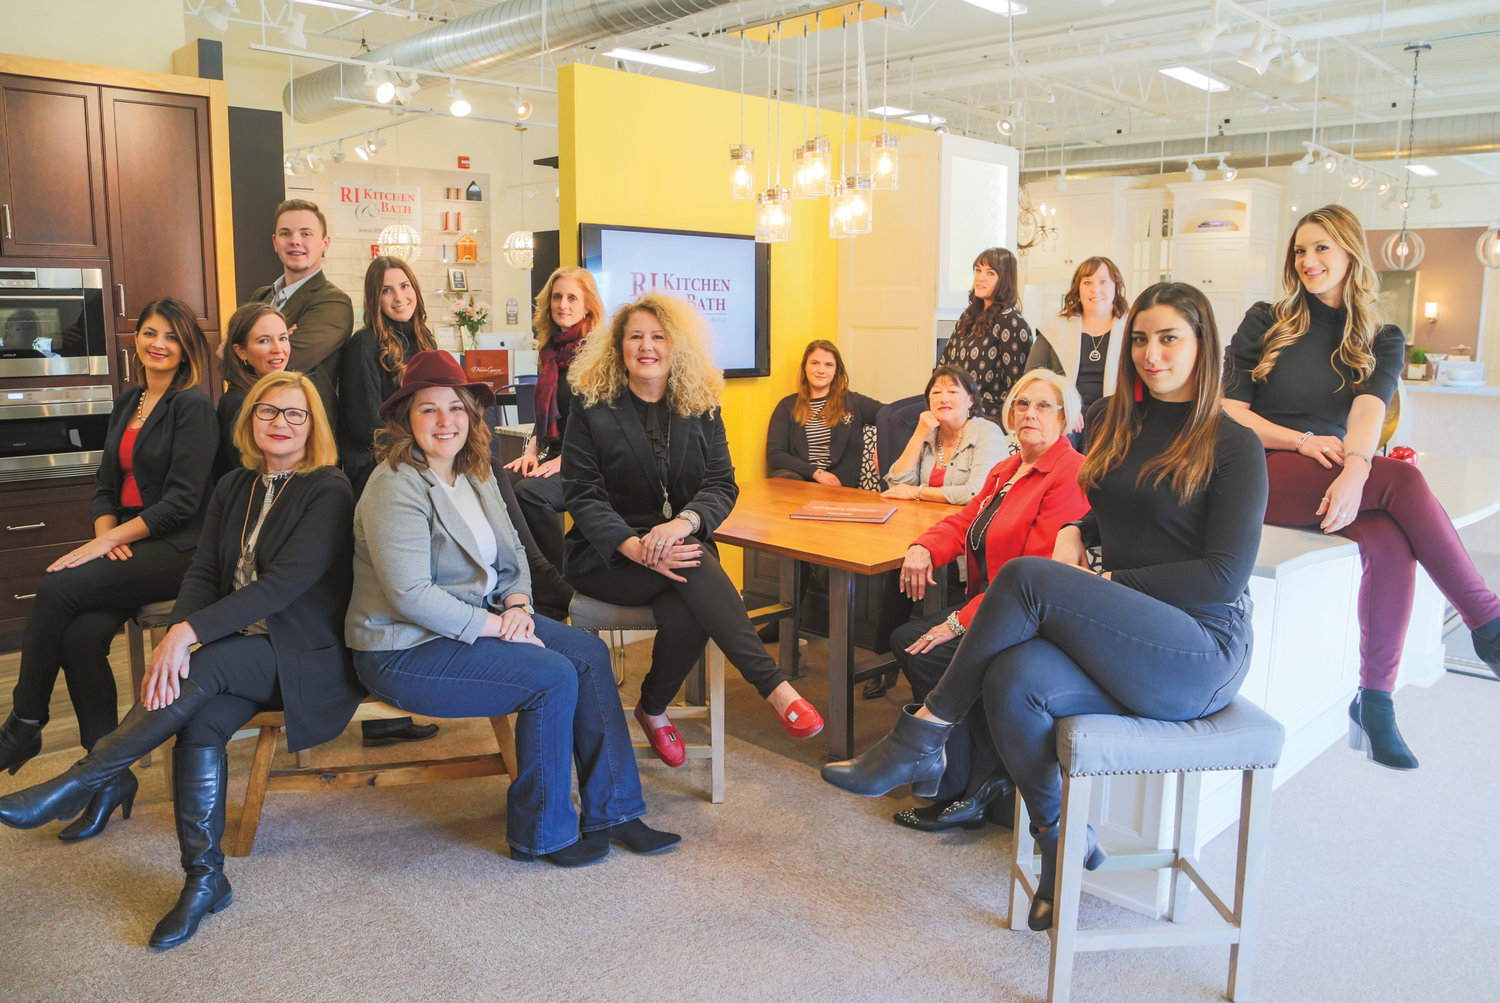 The design team at RIKB Design Build, led by President & Owner Tanya Donahue, have the know-how and passion to “Create a Dream Space You’ll Love anywhere in your home.”